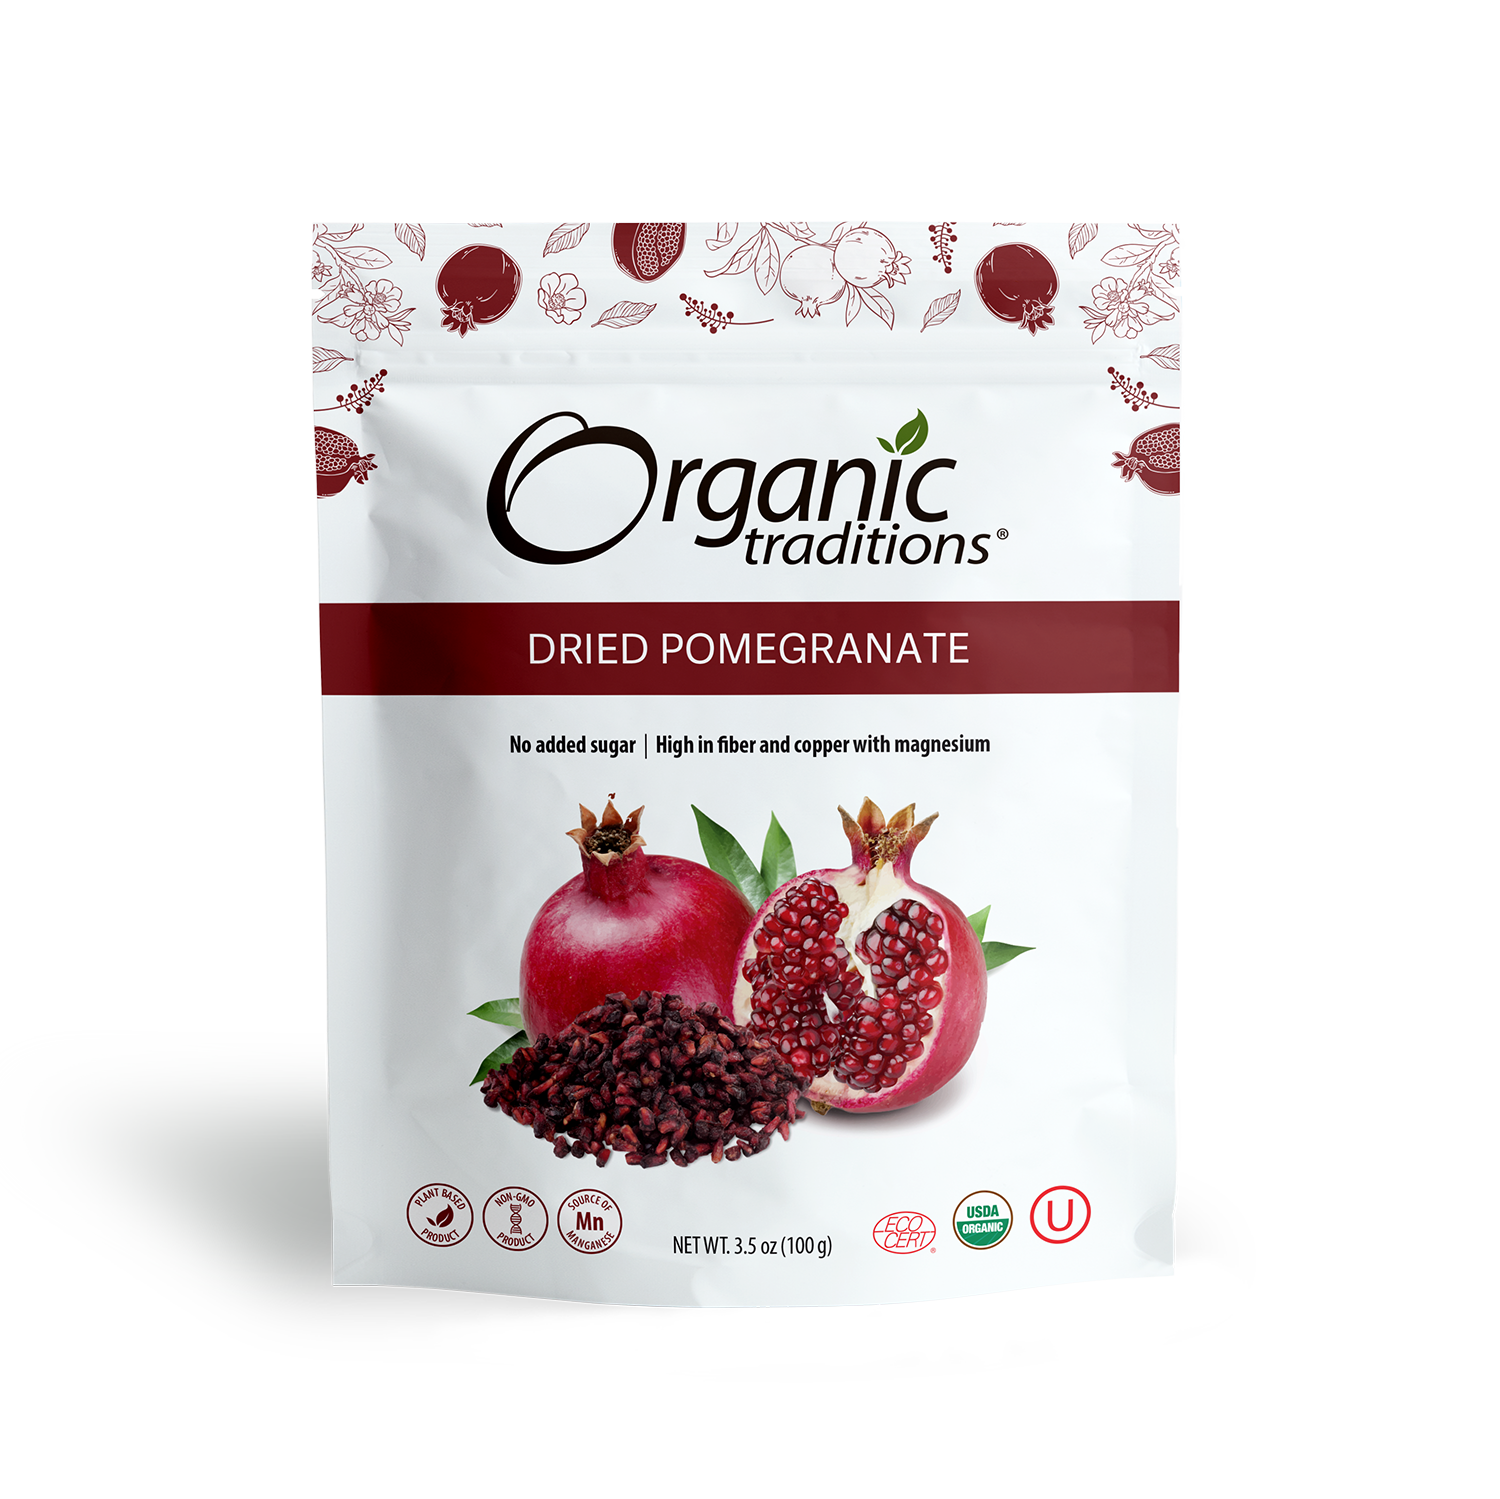 organic traditions dried pomegranate front of bag image